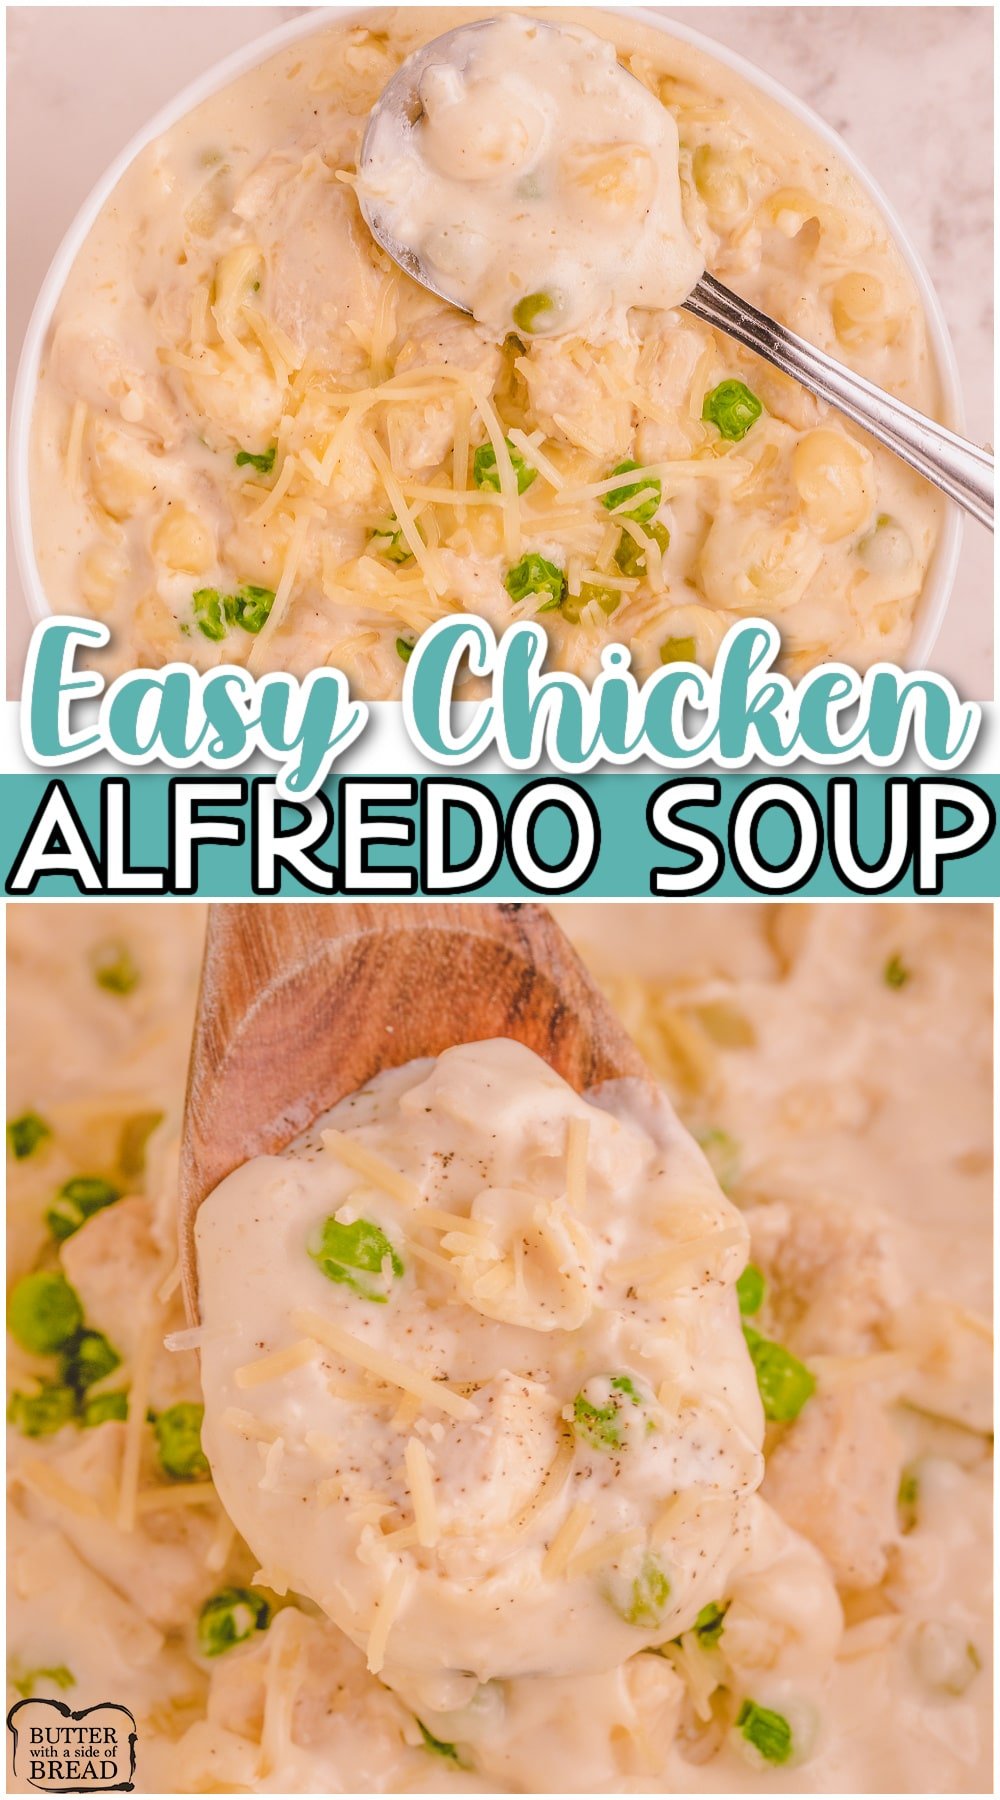 Chicken Alfredo Soup is a simple recipe for pure, creamy comfort-food!  Our popular homemade Alfredo sauce is combined with chicken, broth, pasta & veggies for a delightful alfredo soup recipe.